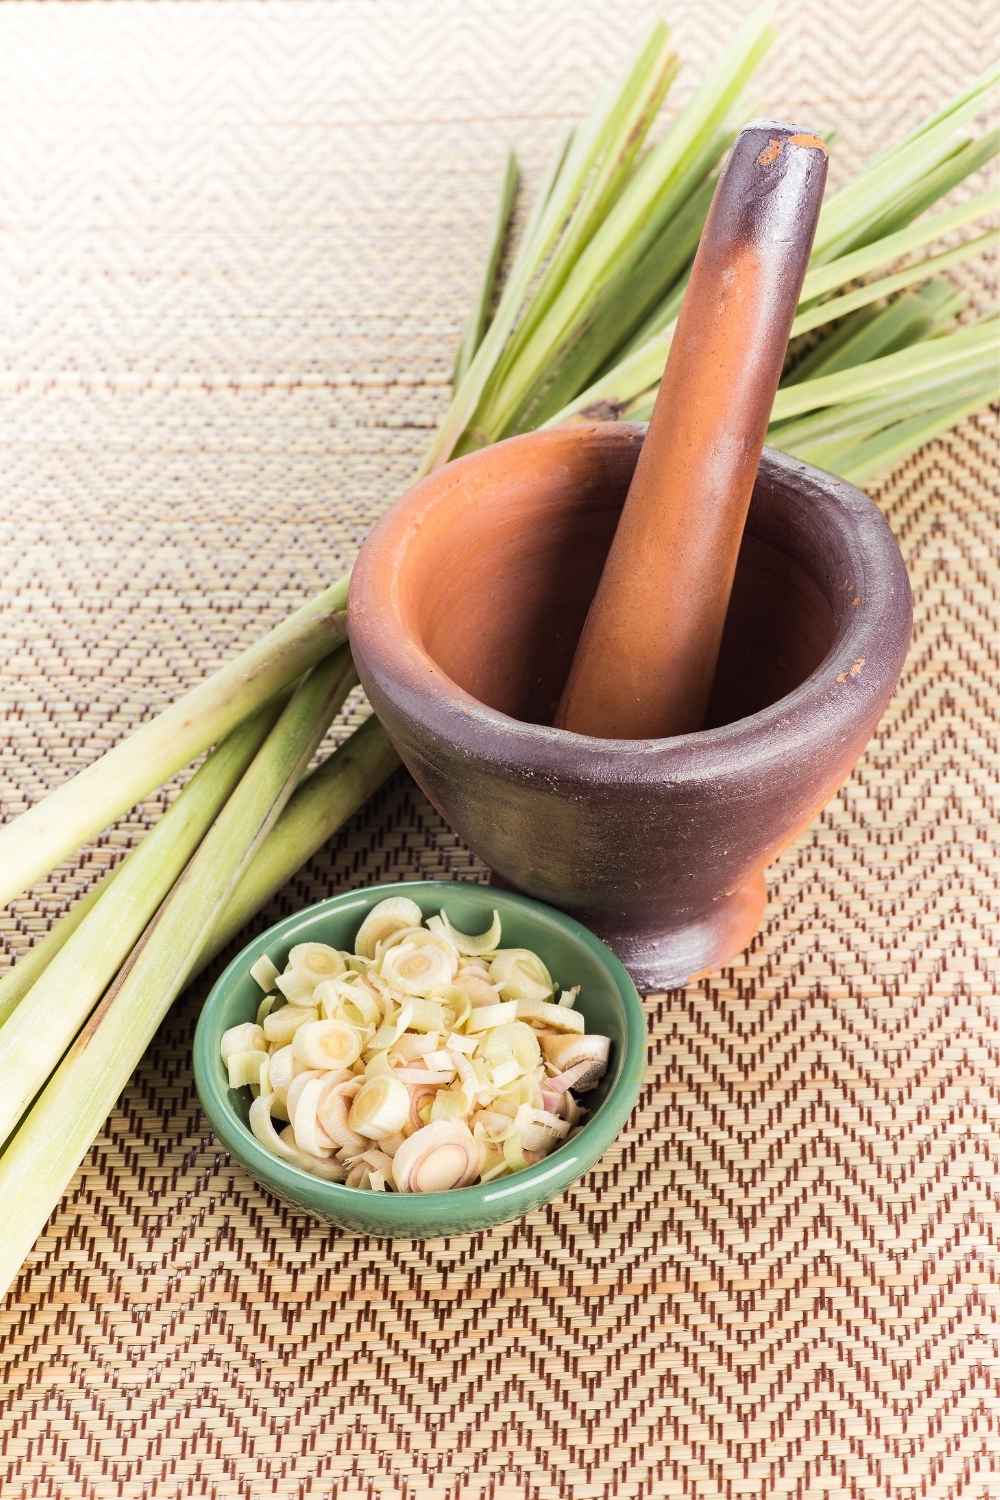 Drying your lemongrass to enjoy it later in your recipes and herbal tea